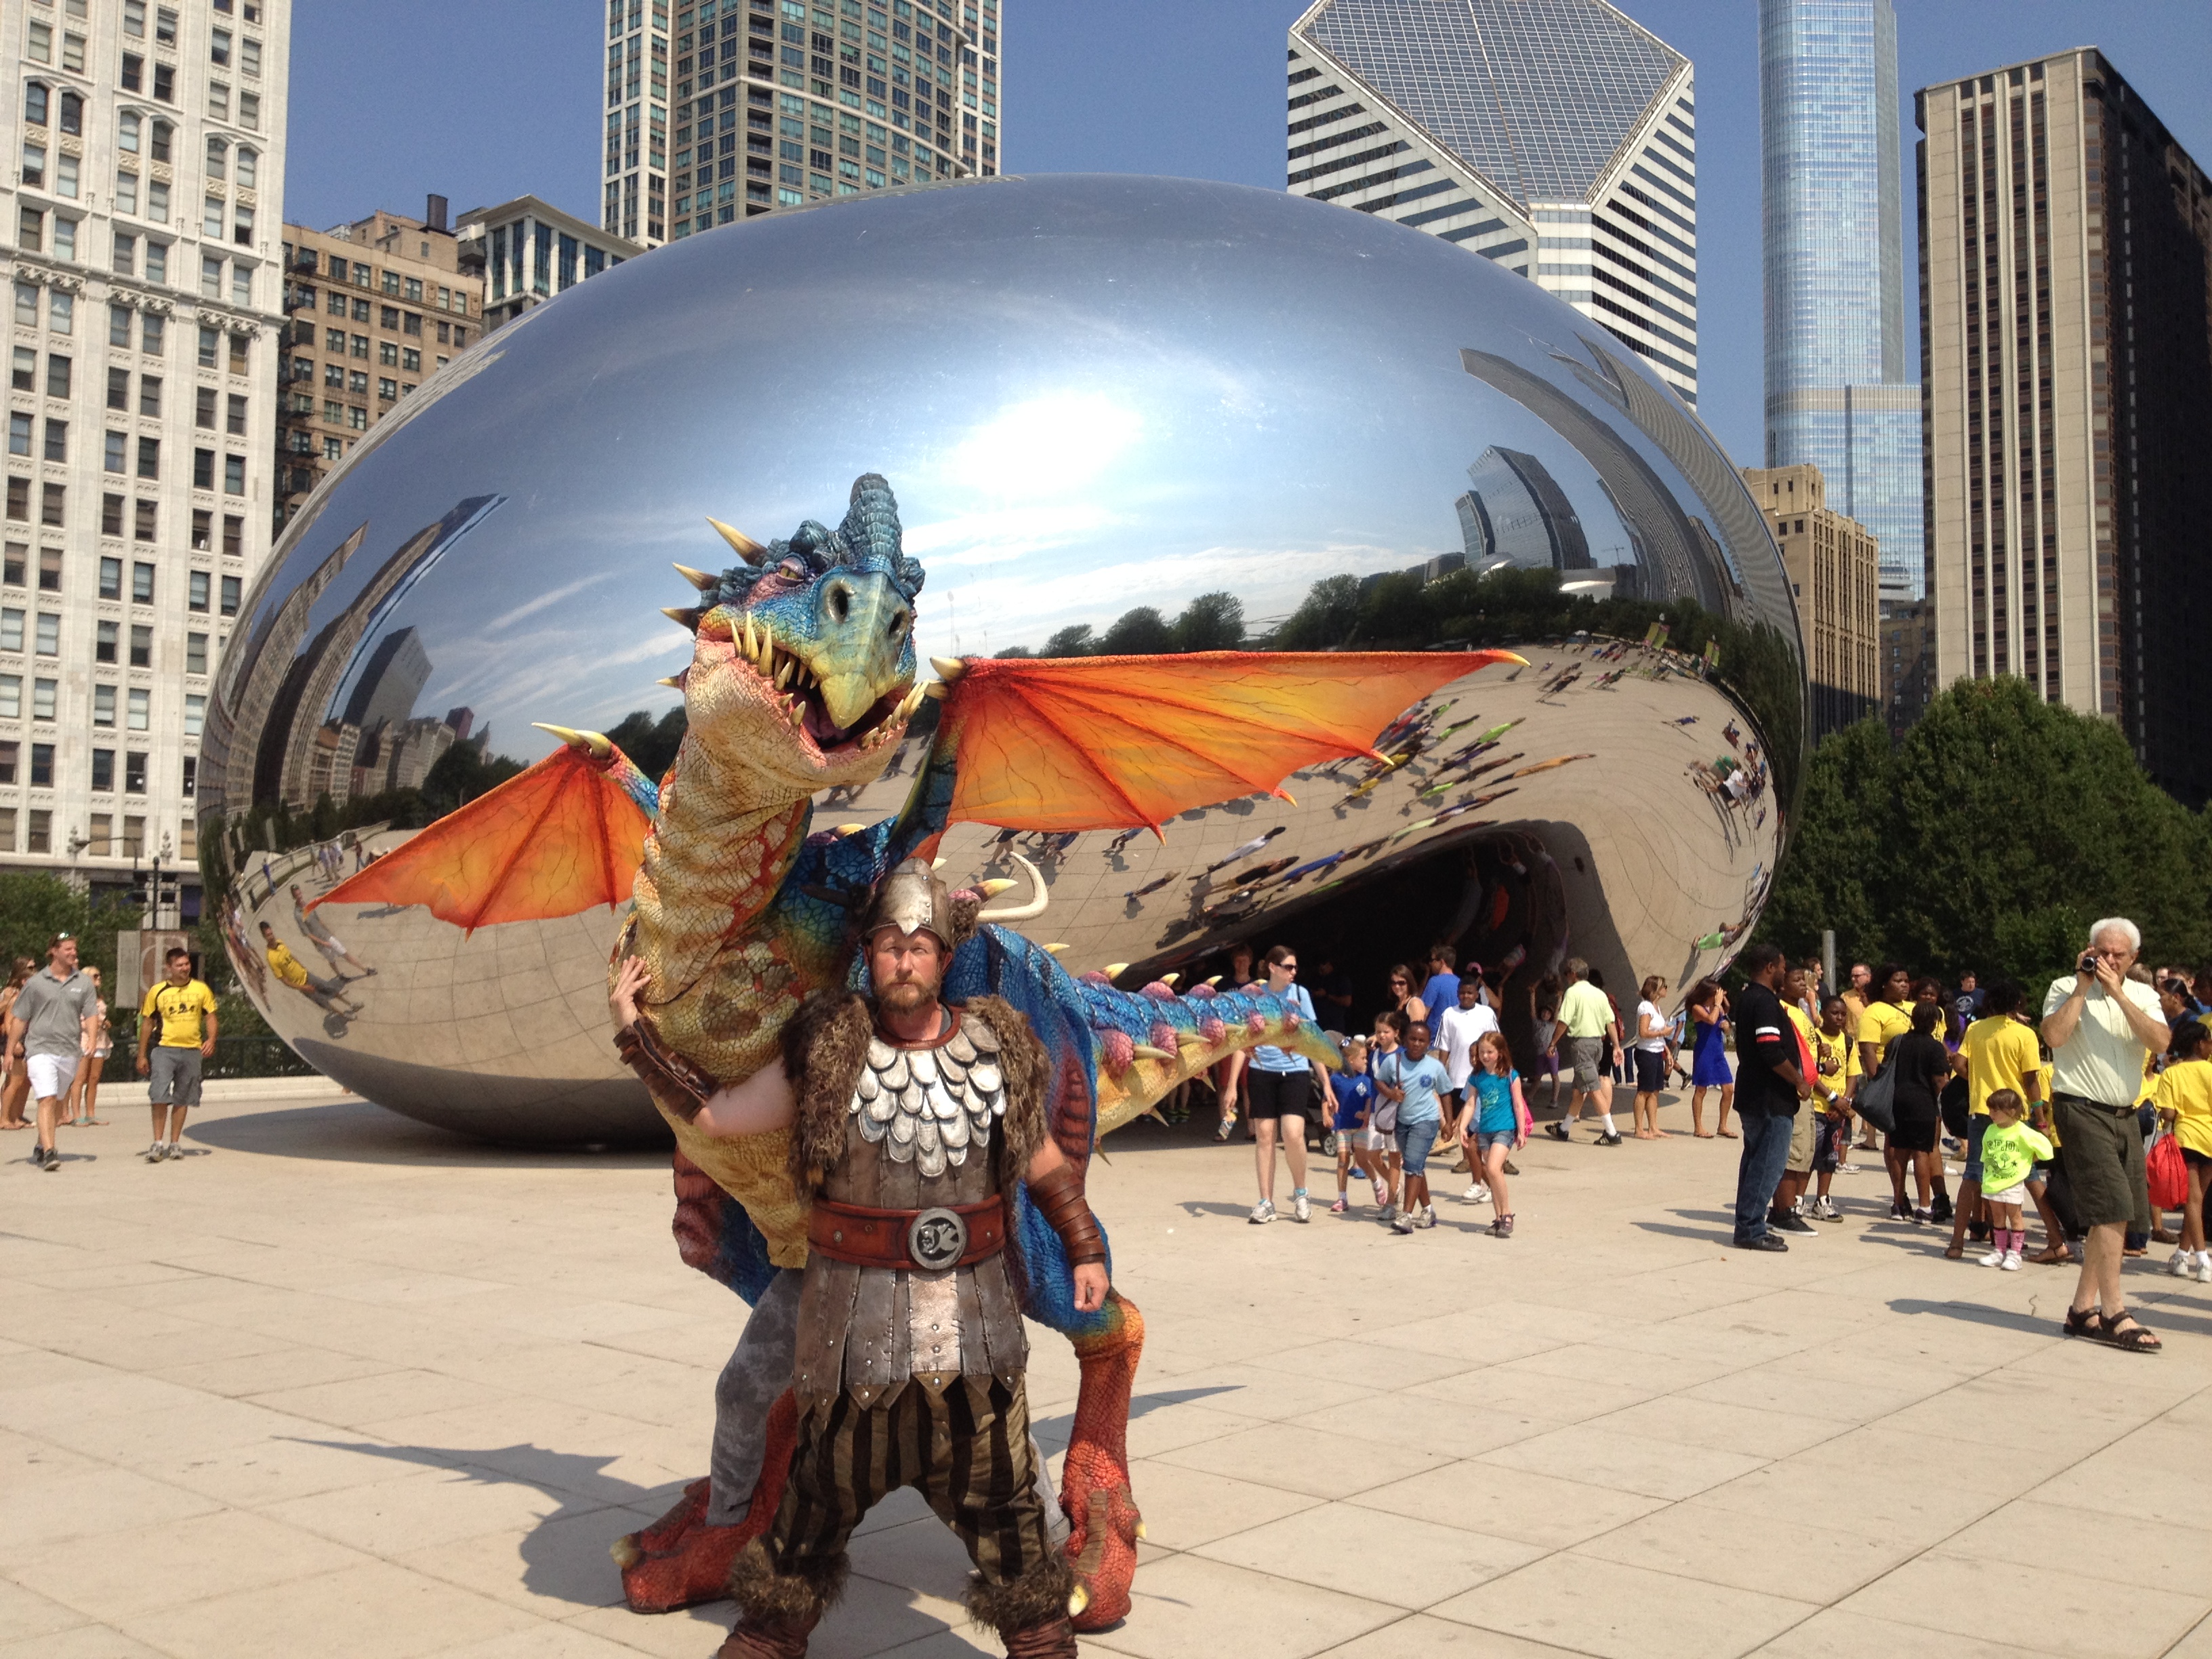 JB Warren at the Cloud Gate sculpture, Chicago, aka the 'Bean'. DreamWorks promo How to Train Your Dragon Live Spectacular.